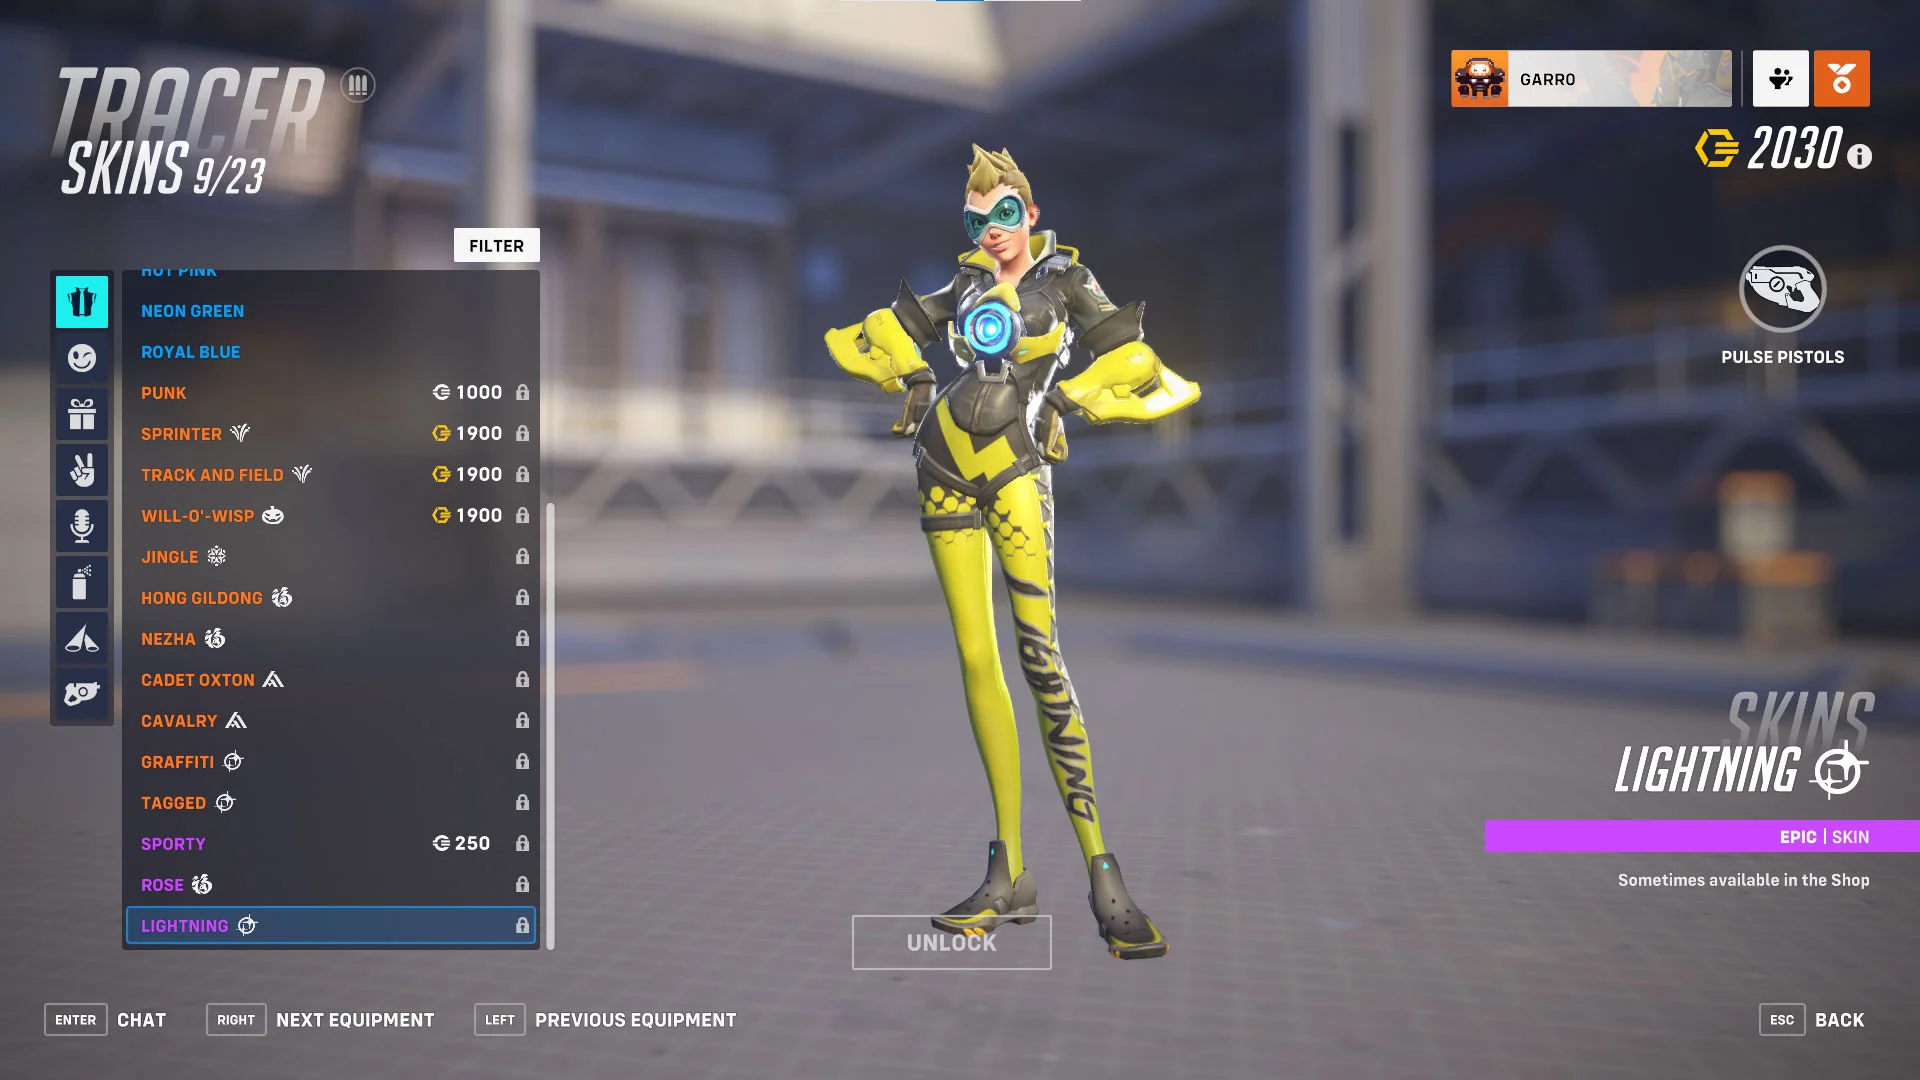 How to Get the Overwatch 2 McDonalds Tracer Skin